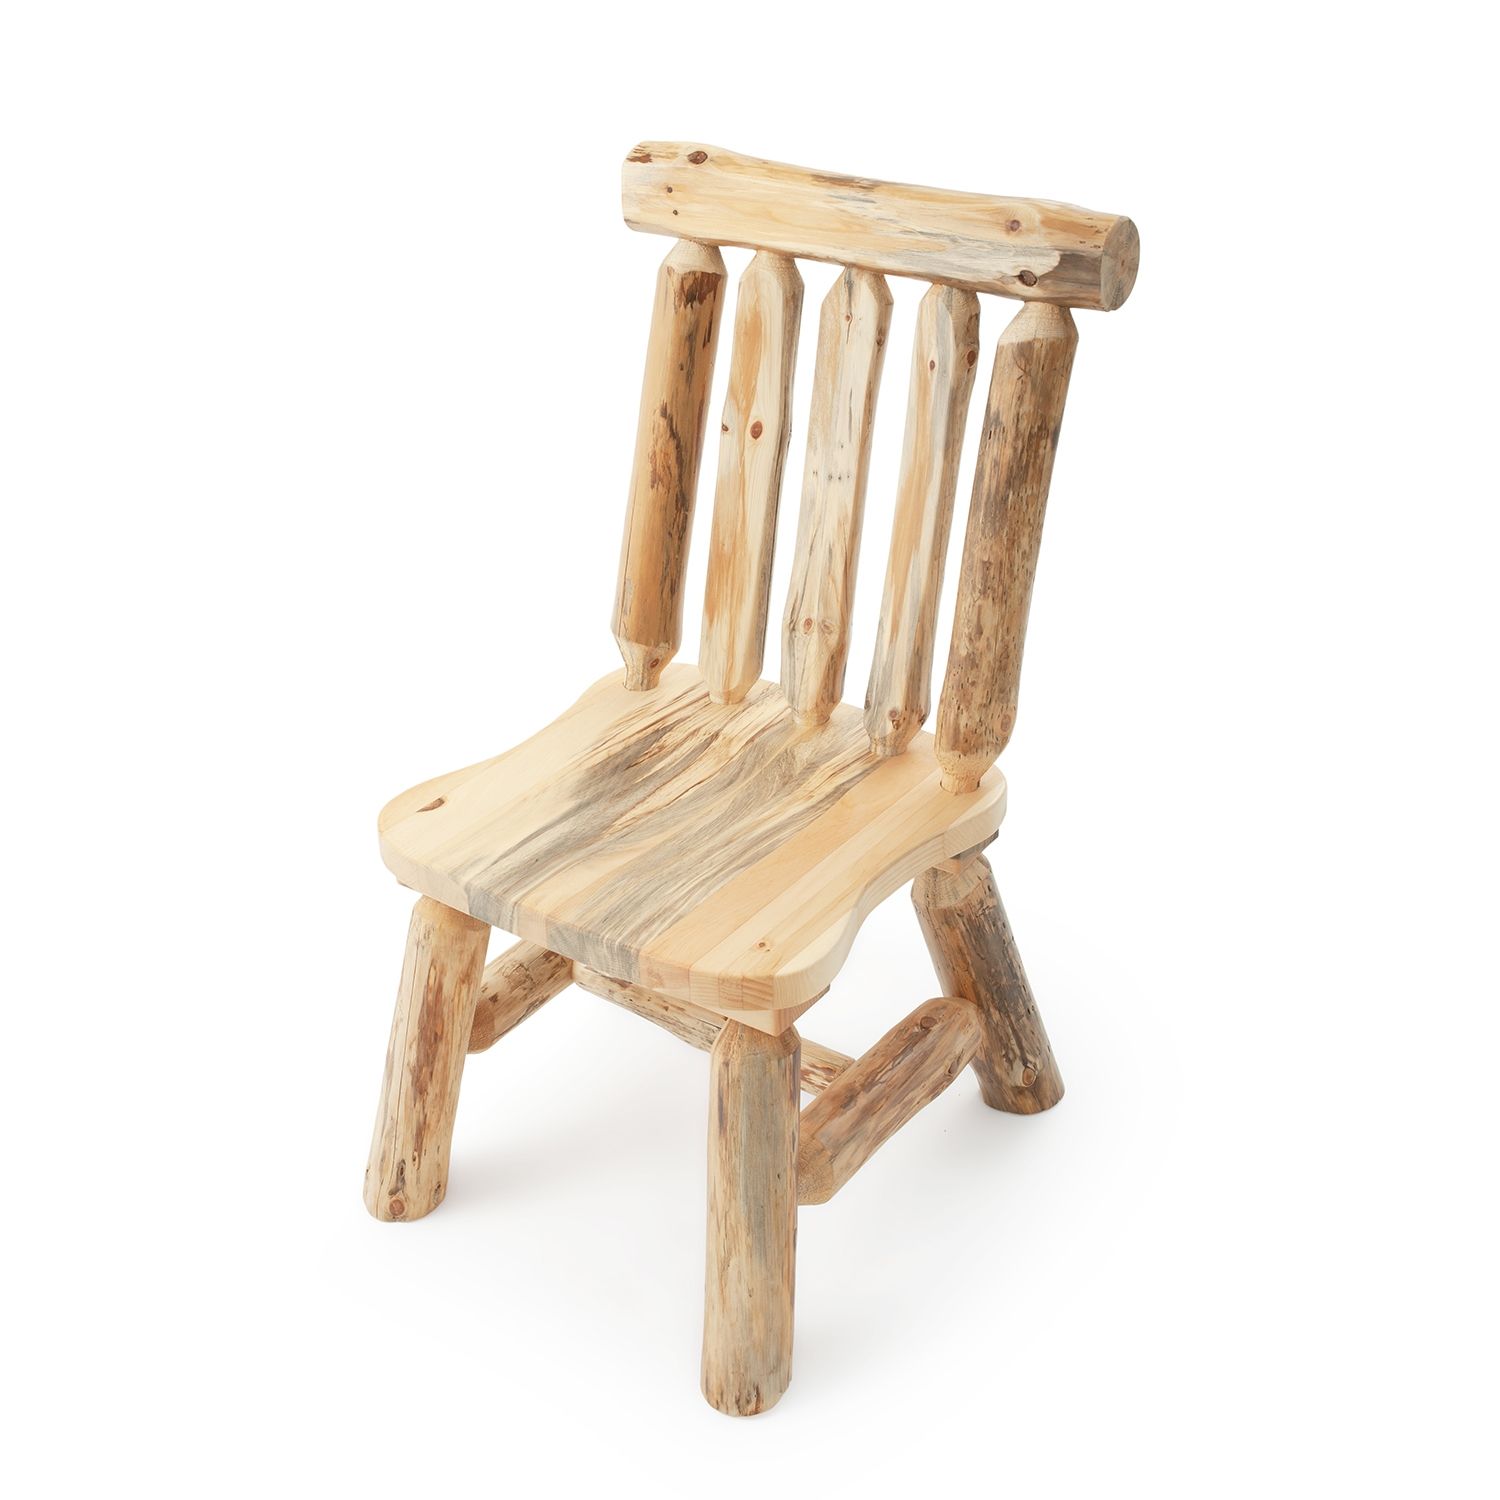 Backwoods Rustic Pine Log Dining Chair